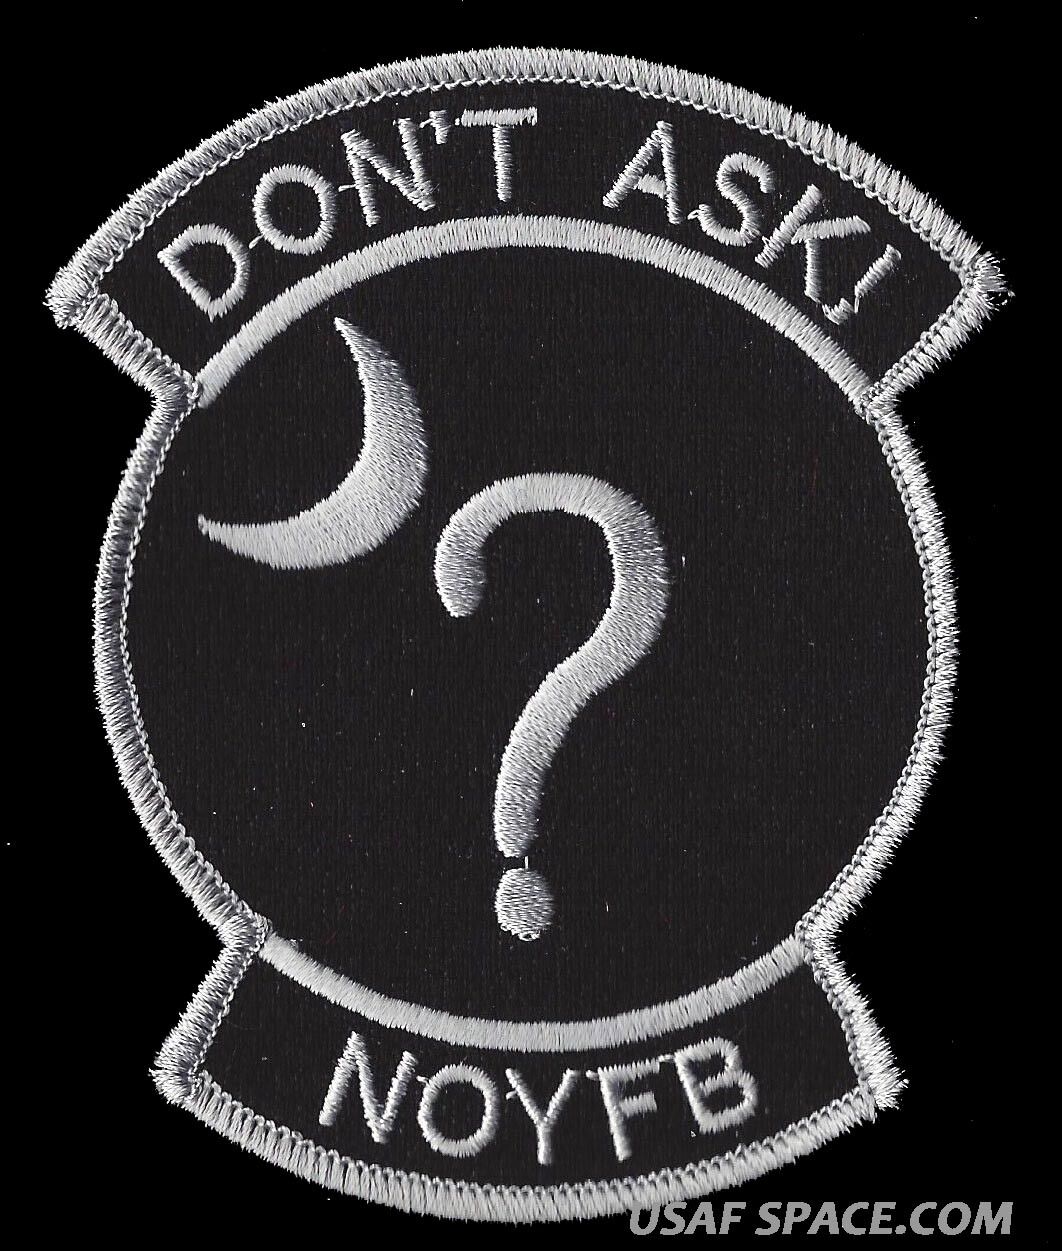 Usaf Classified Black Ops Area 51 Don't Ask ! Noyfb Non-commercial Patch Mint